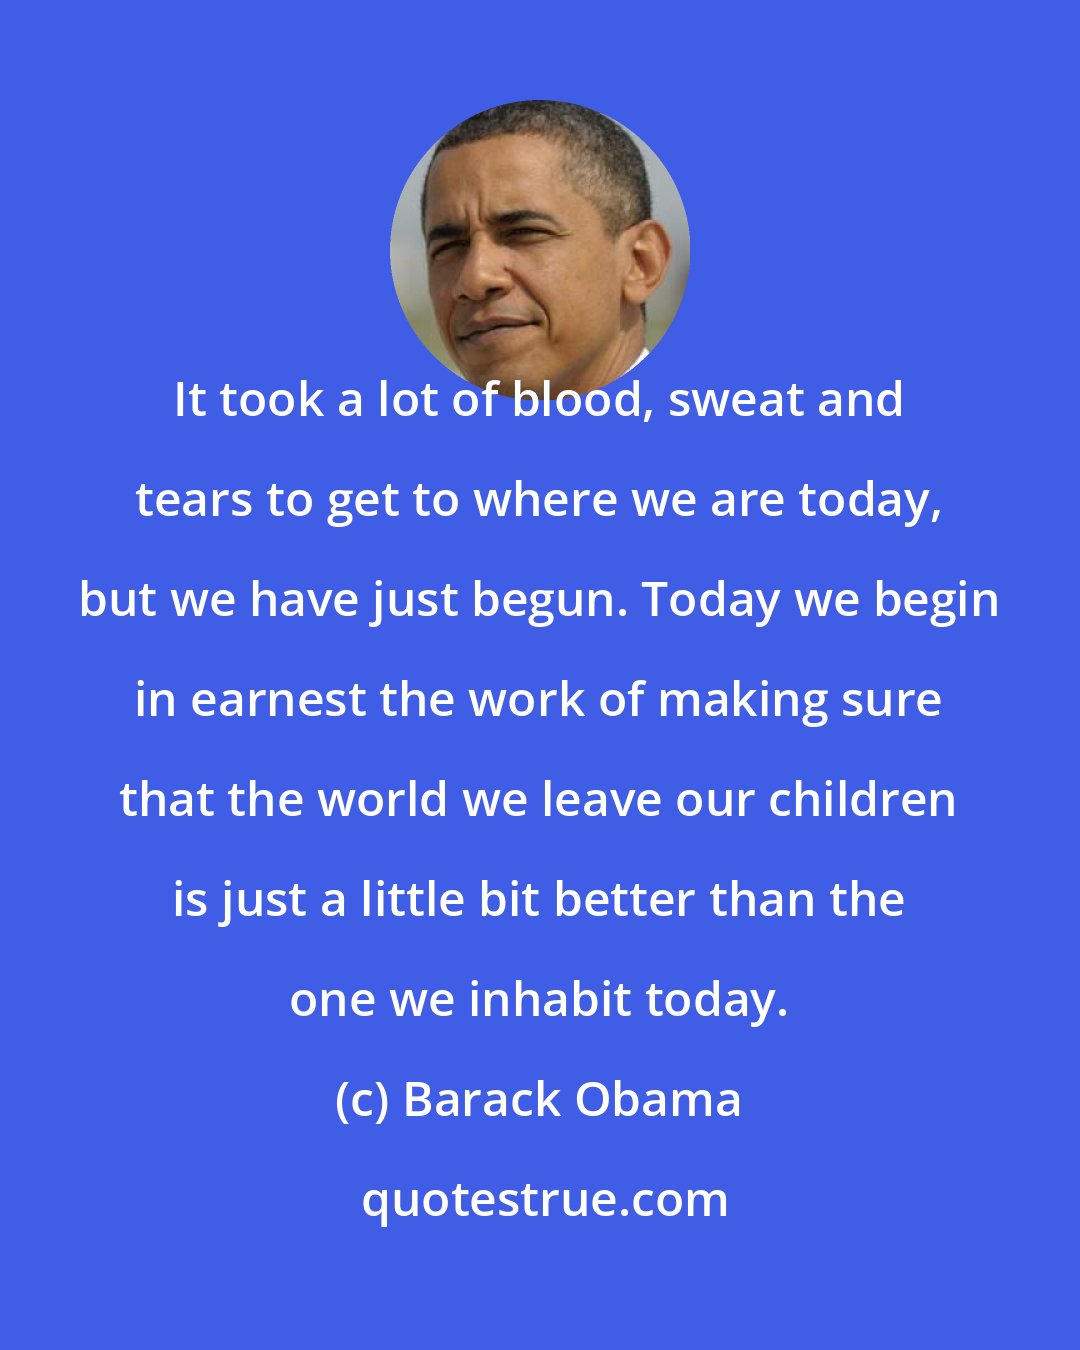 Barack Obama: It took a lot of blood, sweat and tears to get to where we are today, but we have just begun. Today we begin in earnest the work of making sure that the world we leave our children is just a little bit better than the one we inhabit today.